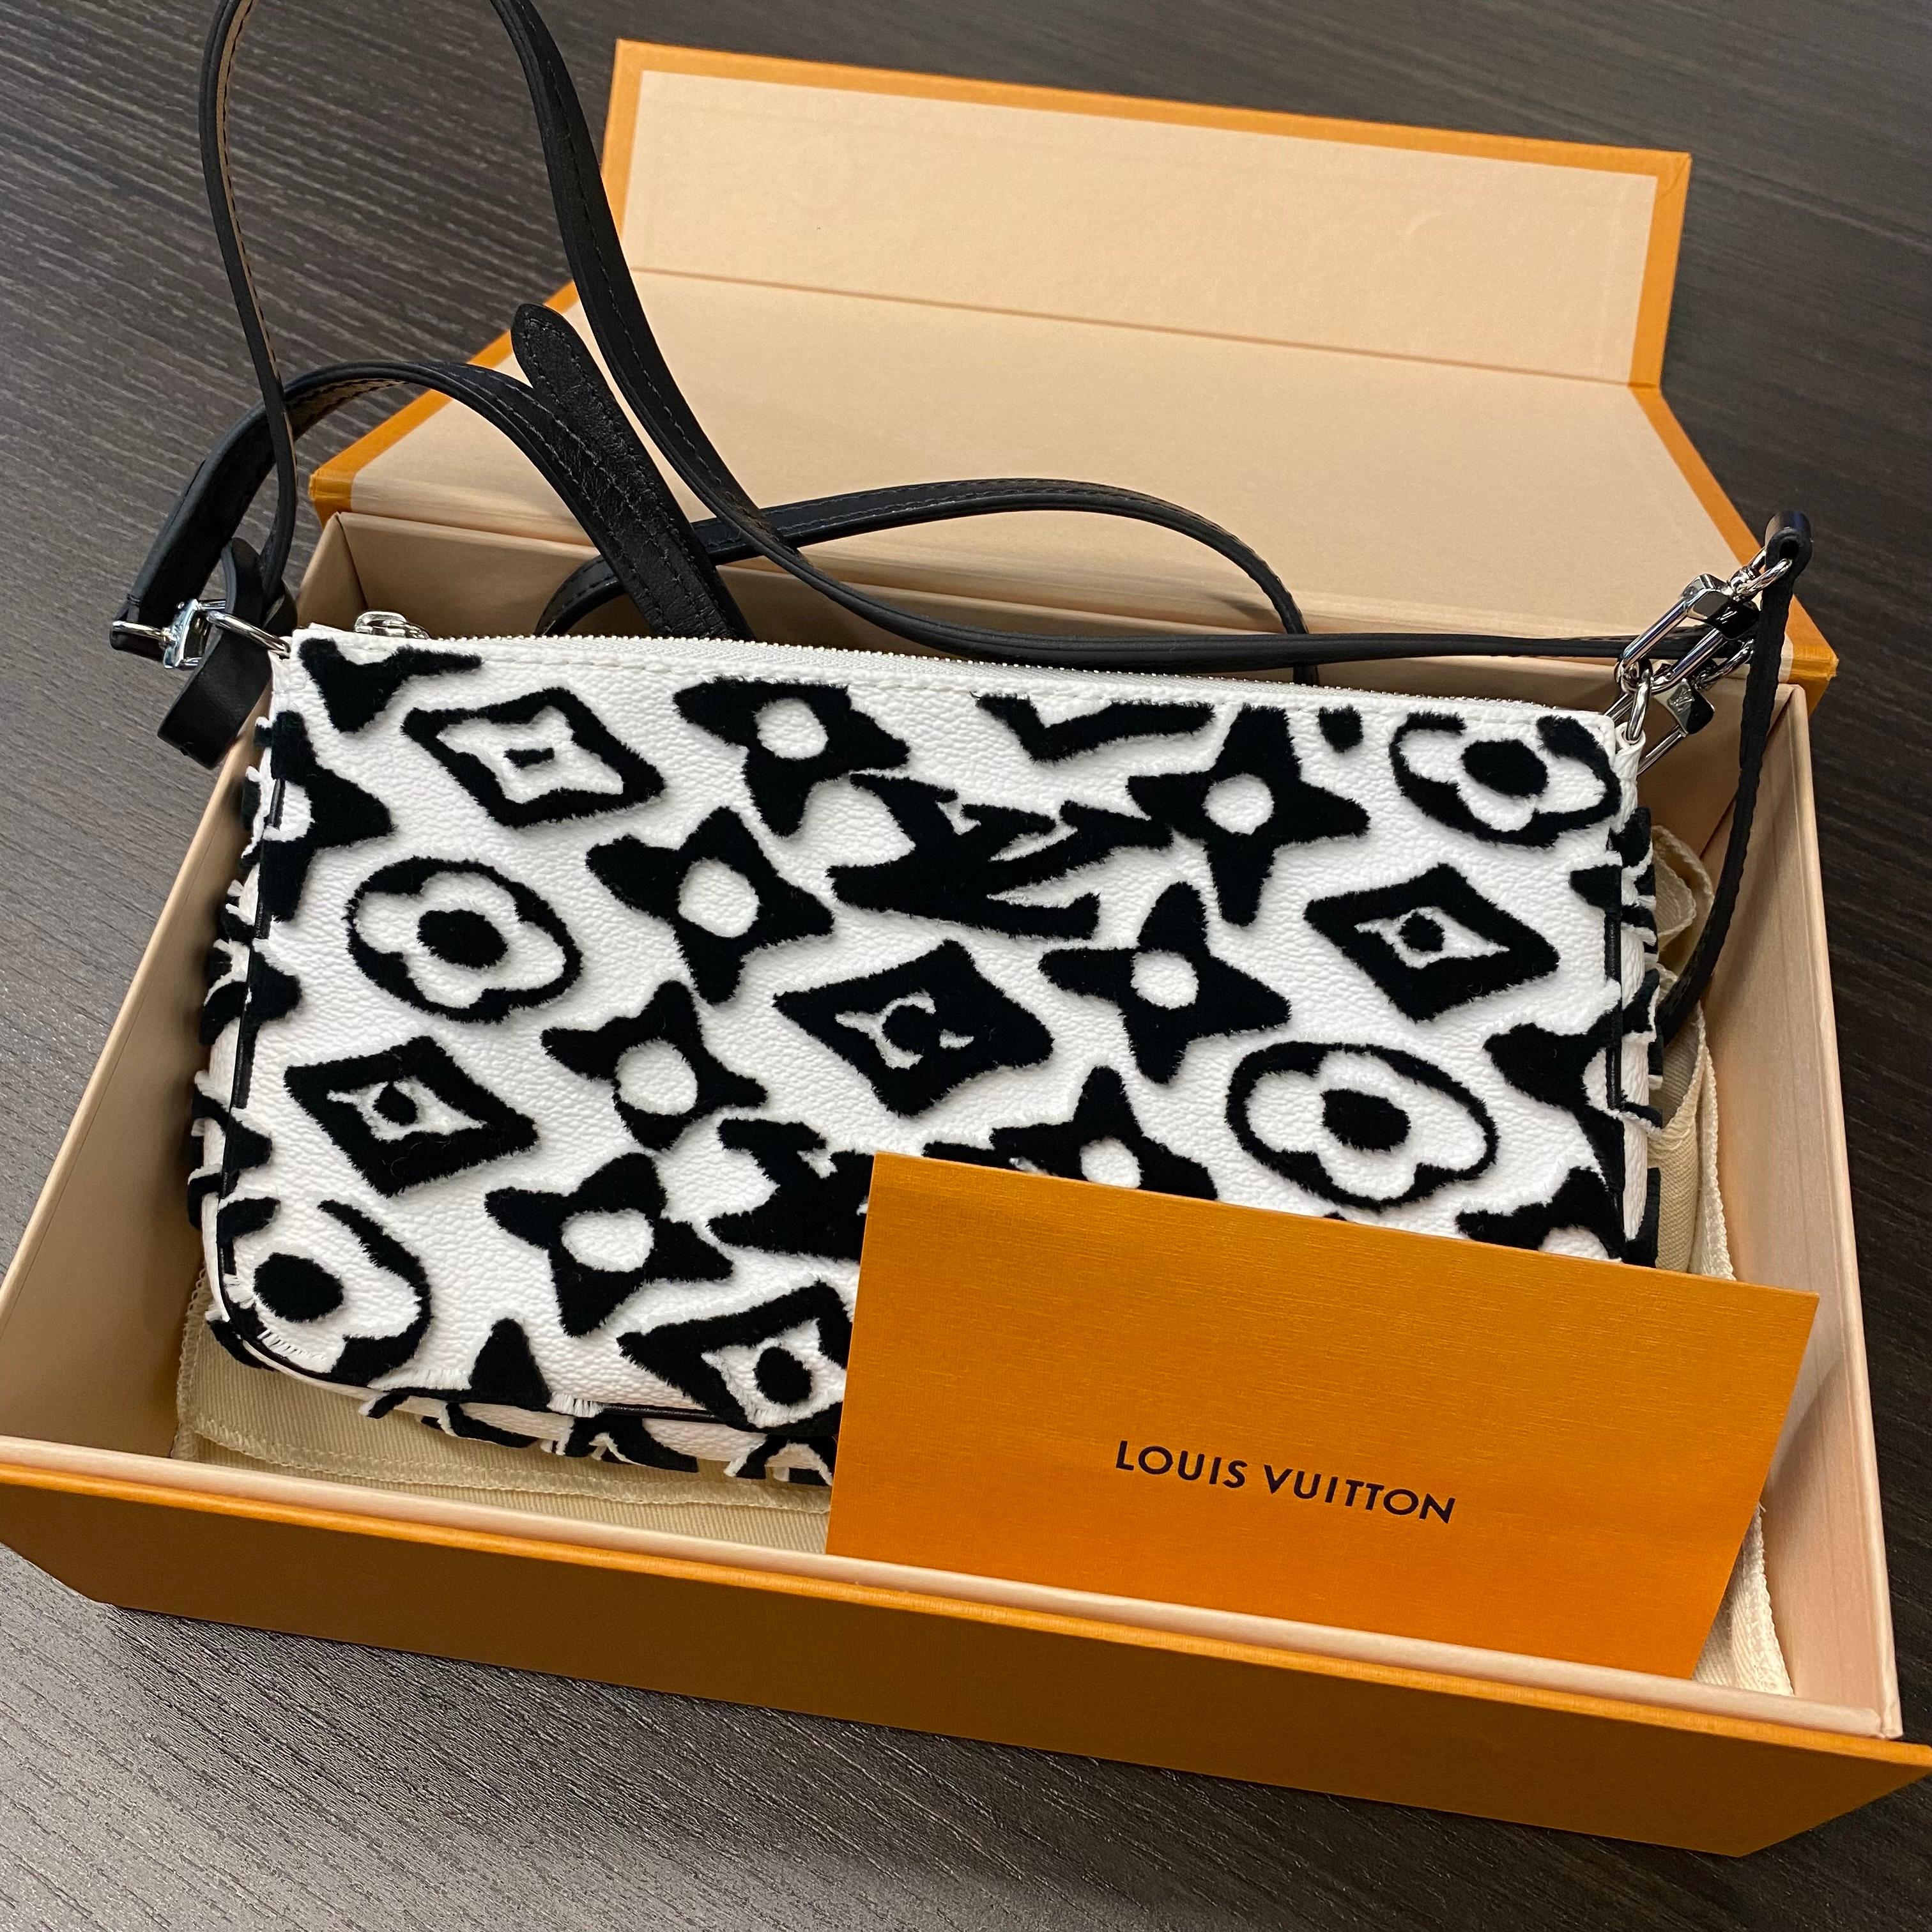 This special edition Louis Vuitton Pochette Accessoires handbag is arrayed in the arty new version of Monogram, reimagined by Urs Fischer for the exclusive LV x UF collection. The velvety tufted motif gives the bag a unique tactile appeal, whether